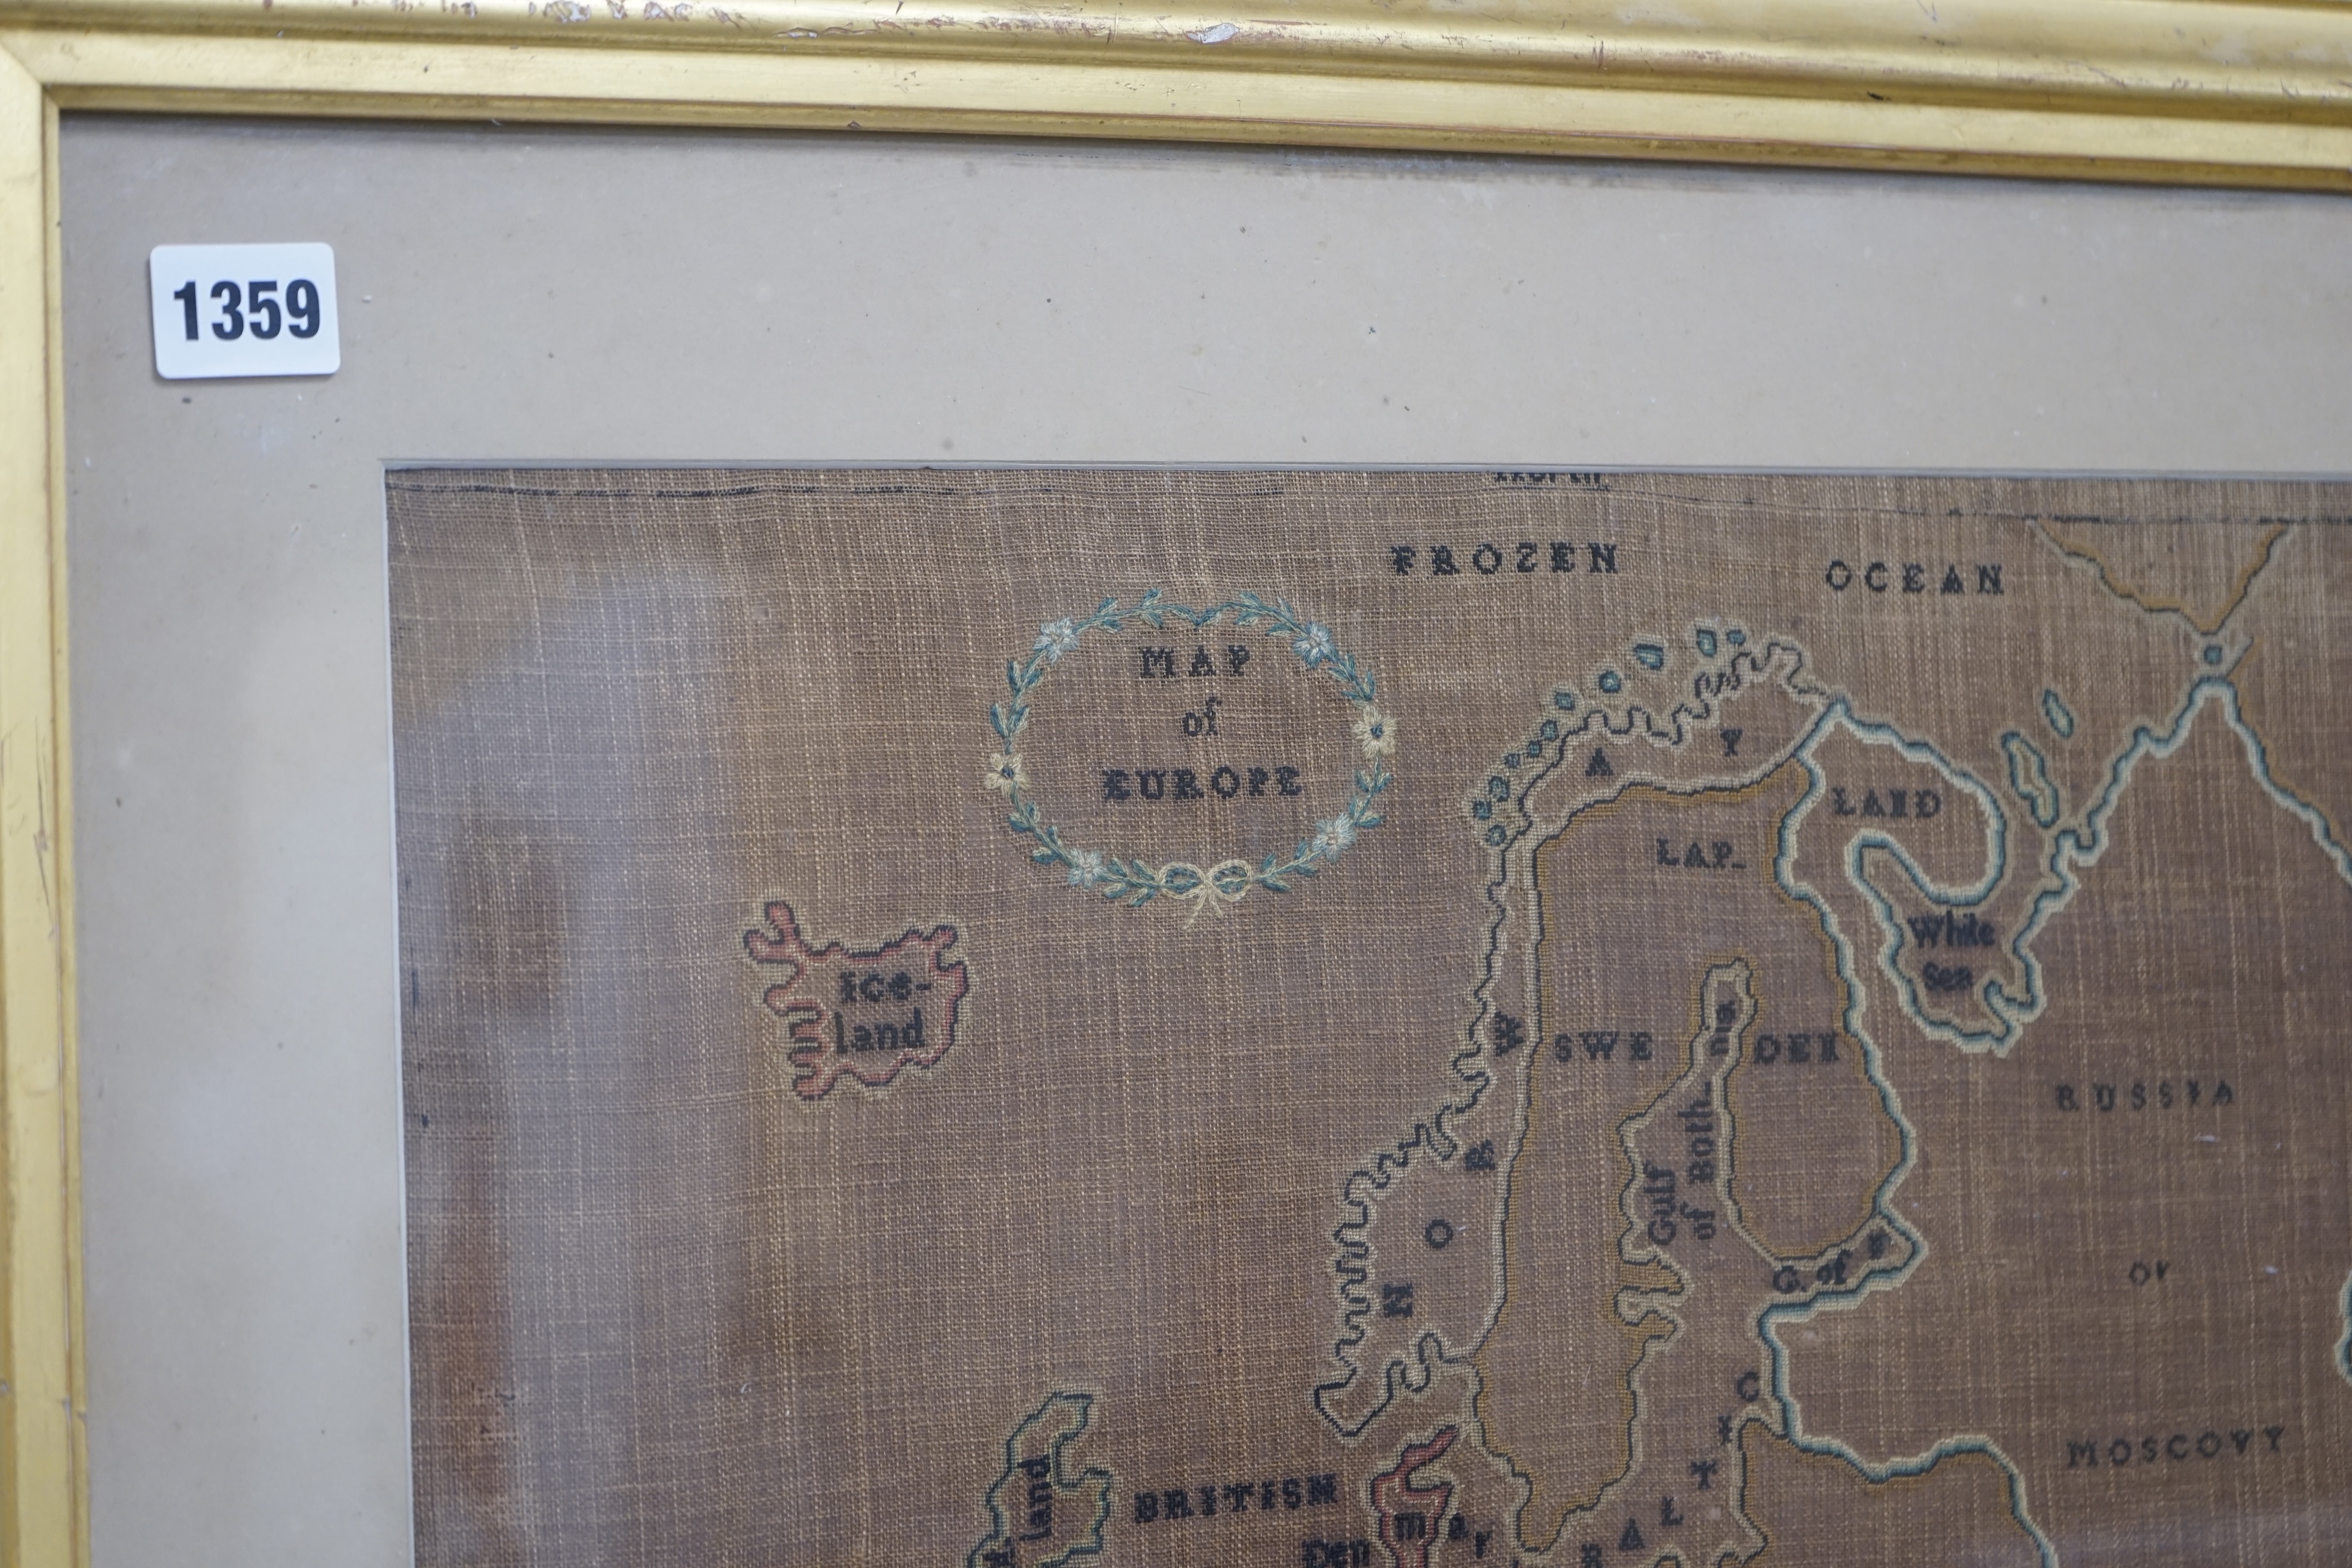 A late 19th century map sampler of Europe, linen backing discoloured by the light and sun, 46cm wide, 47.5cm high. Condition - fair, discolouration and staining